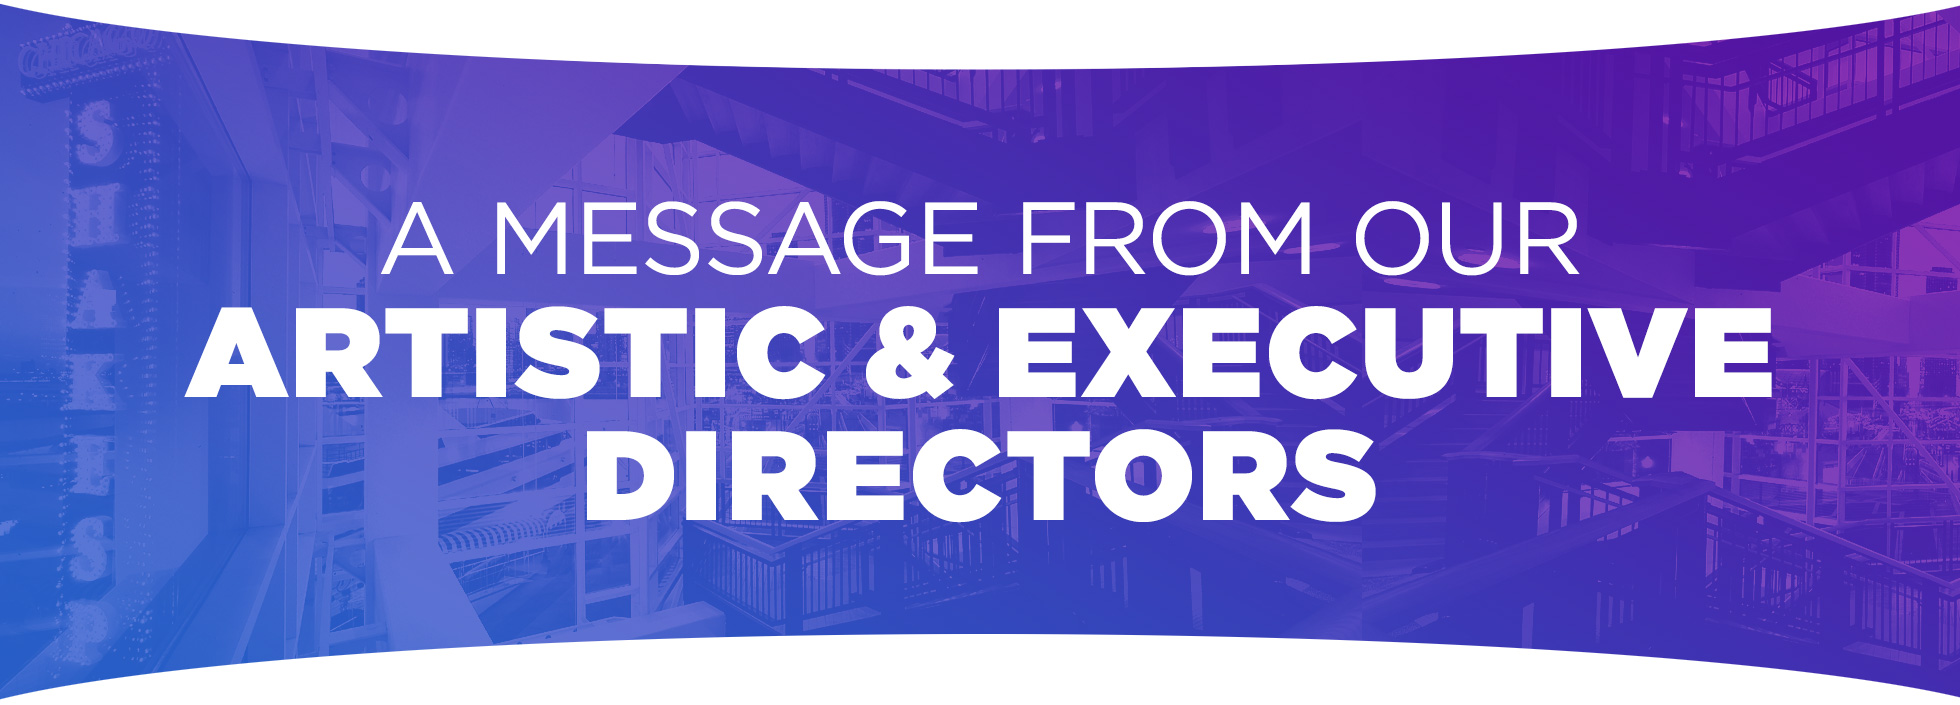 Message from our Artistic & Executive Directors